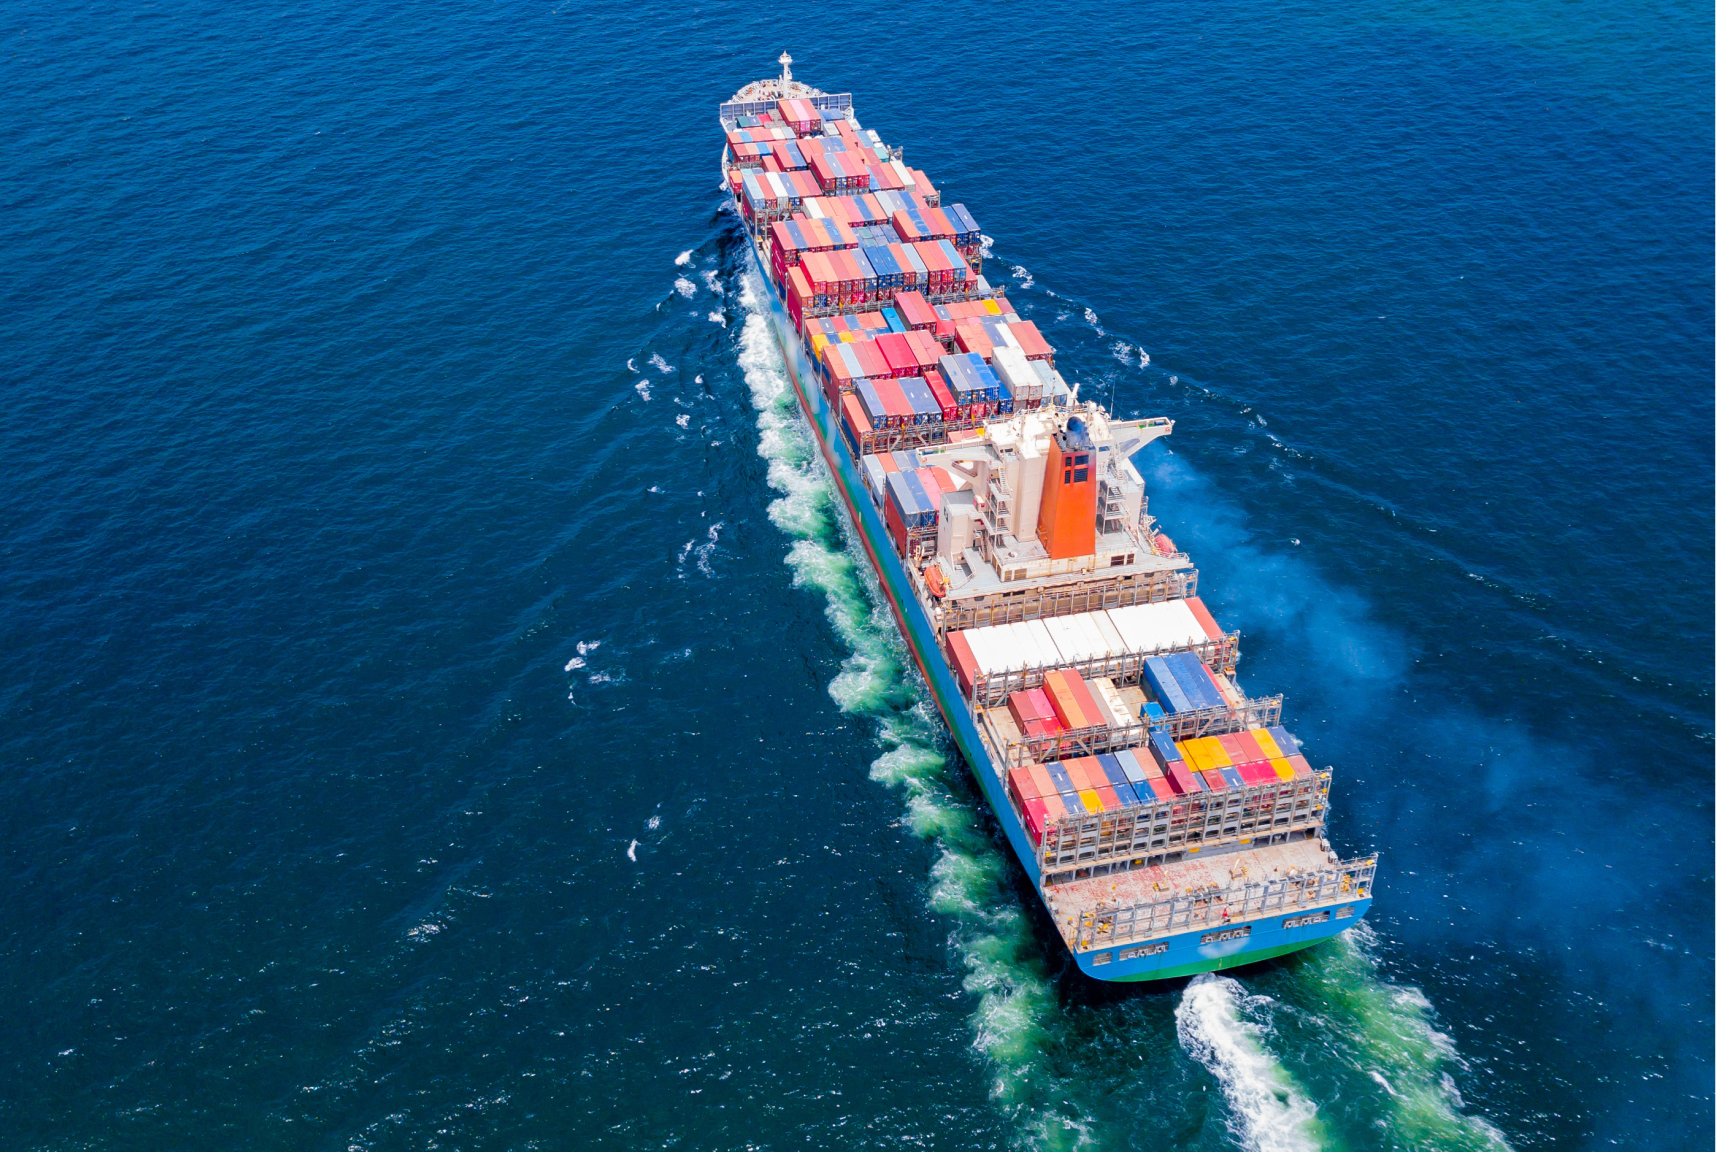 The iamge shows a container ship from a bird's eye view. The ship is carrying a large number of containers, and the water is a deep blue color.